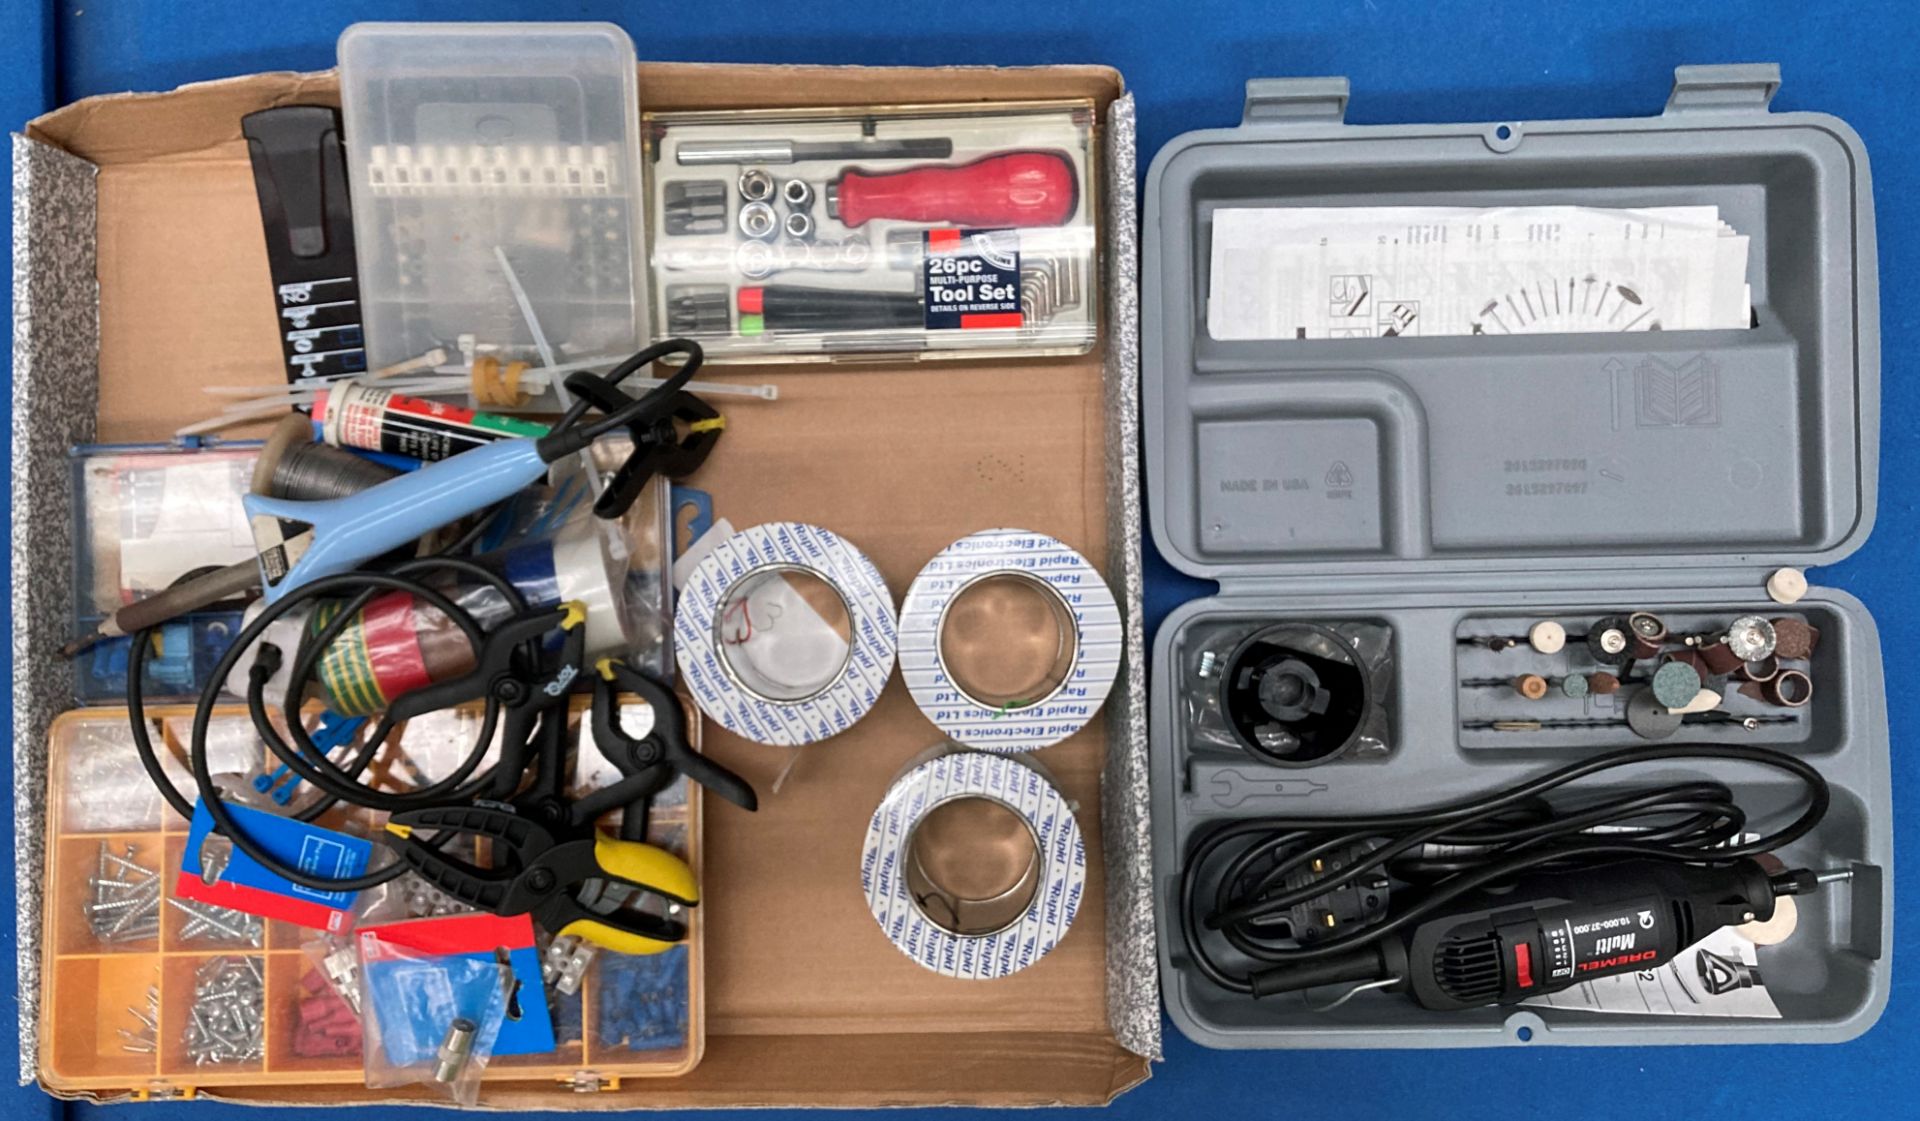 Contents to tray - model makers tools and accessories including a Dremel multi drill with